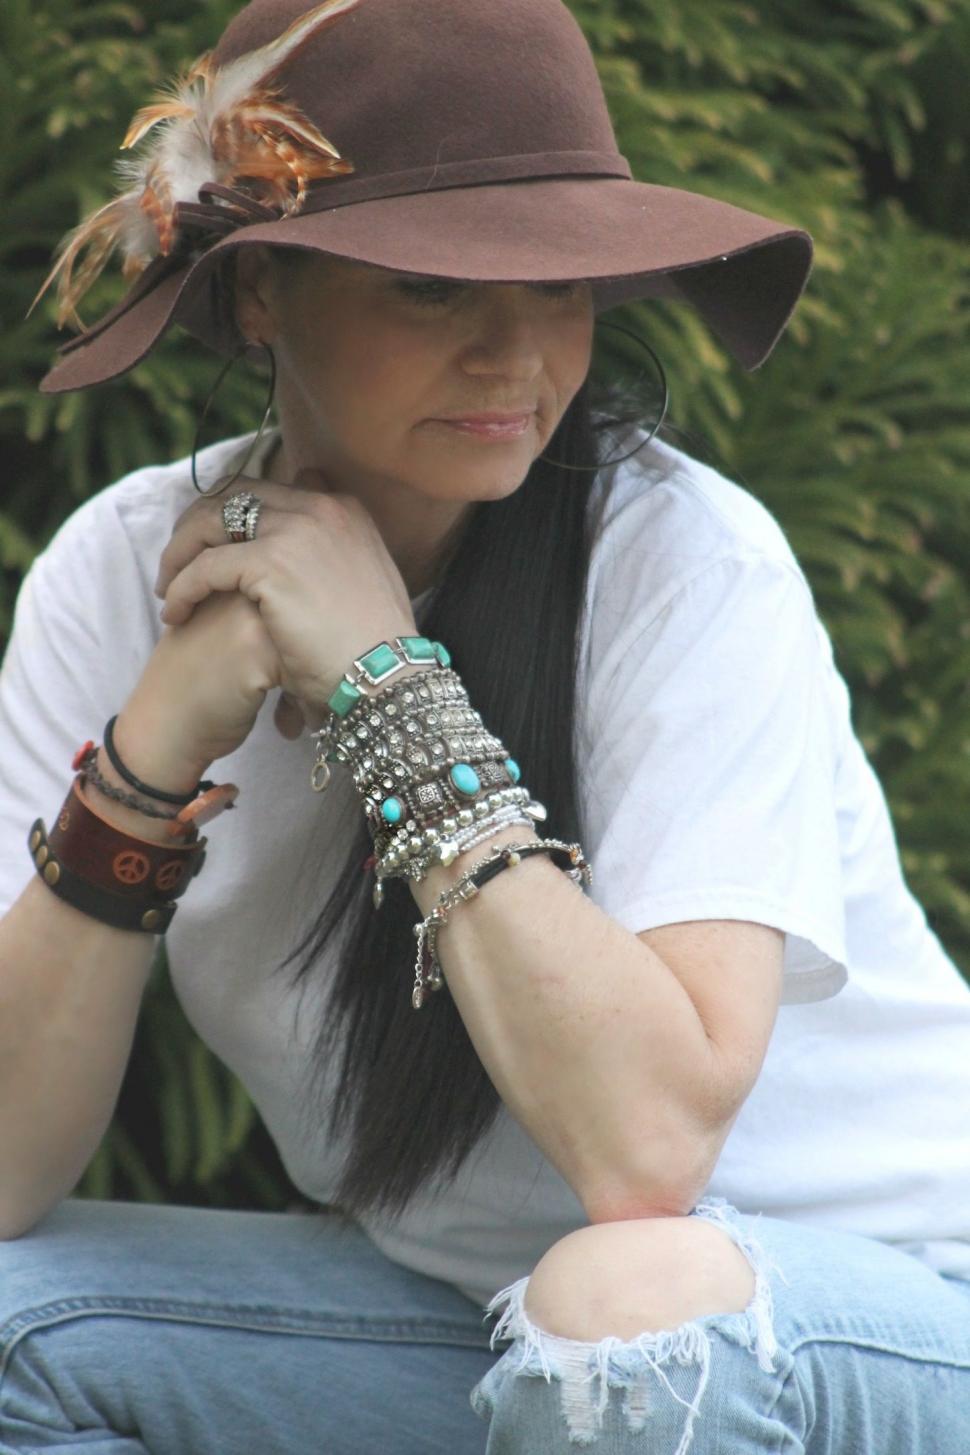 Free Image of Stylish Woman in Brown Floppy Hat Sitting With Folded Hands  